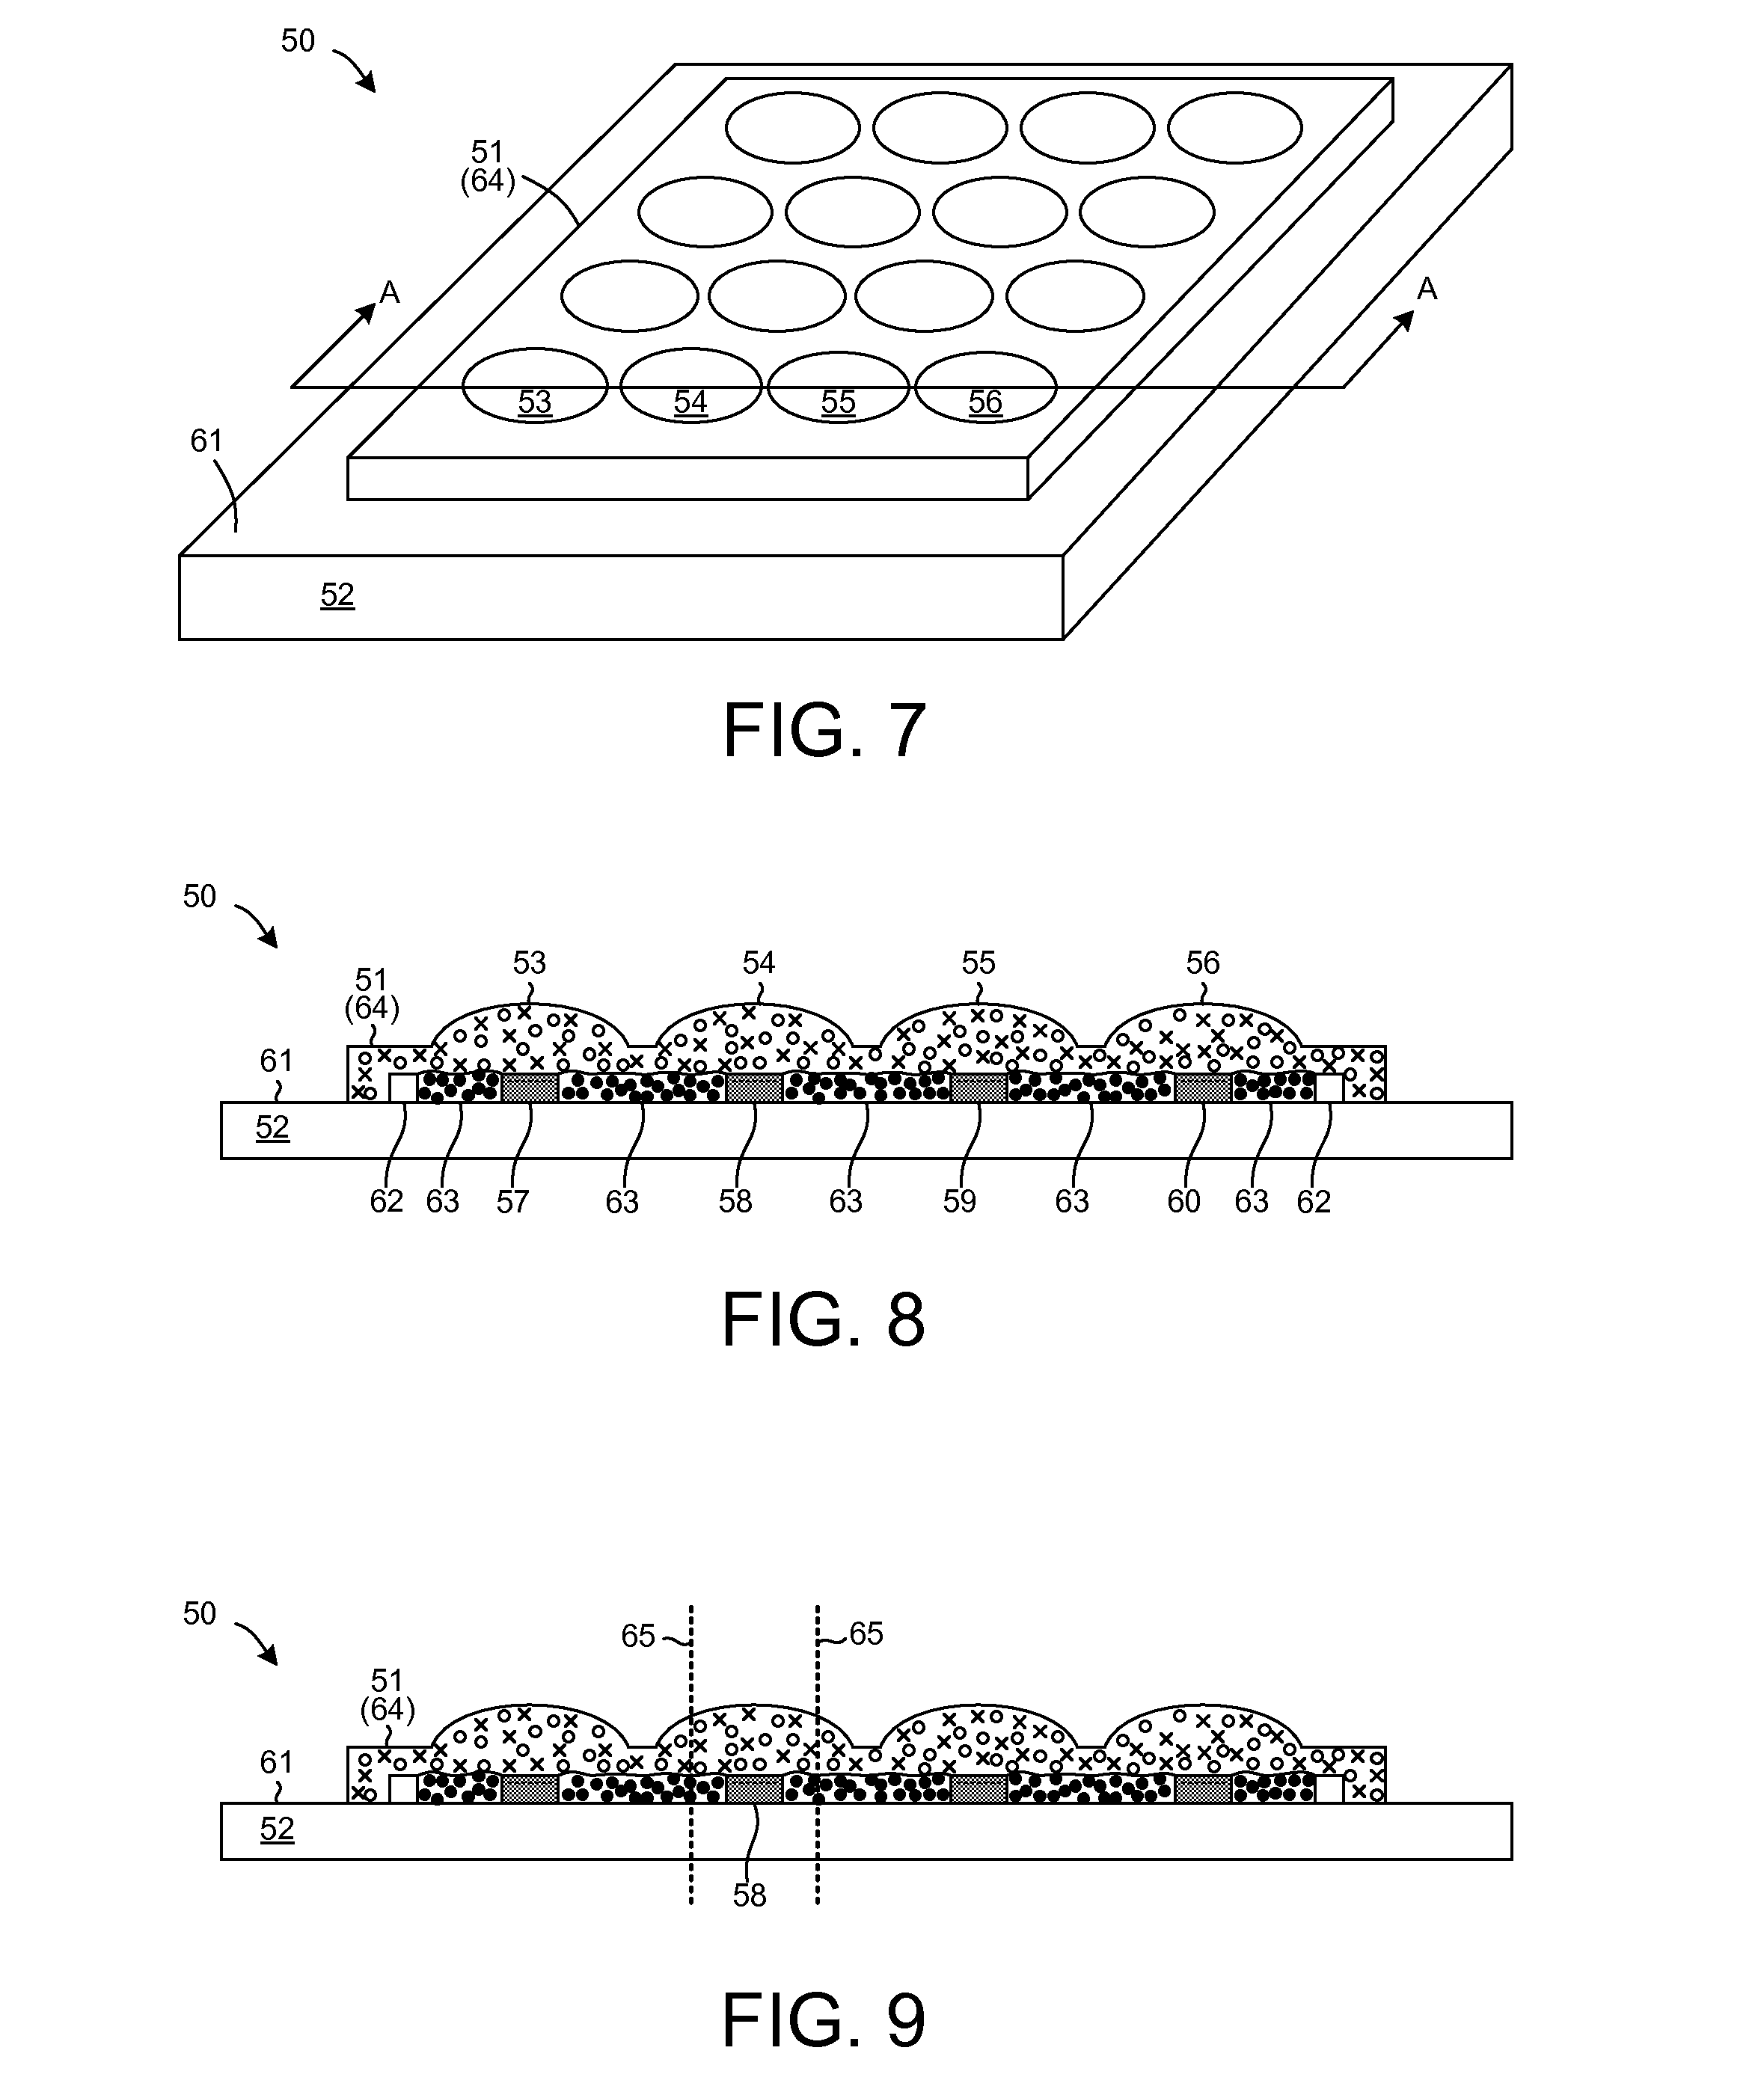 Phosphor placement in white light emitting diode assemblies